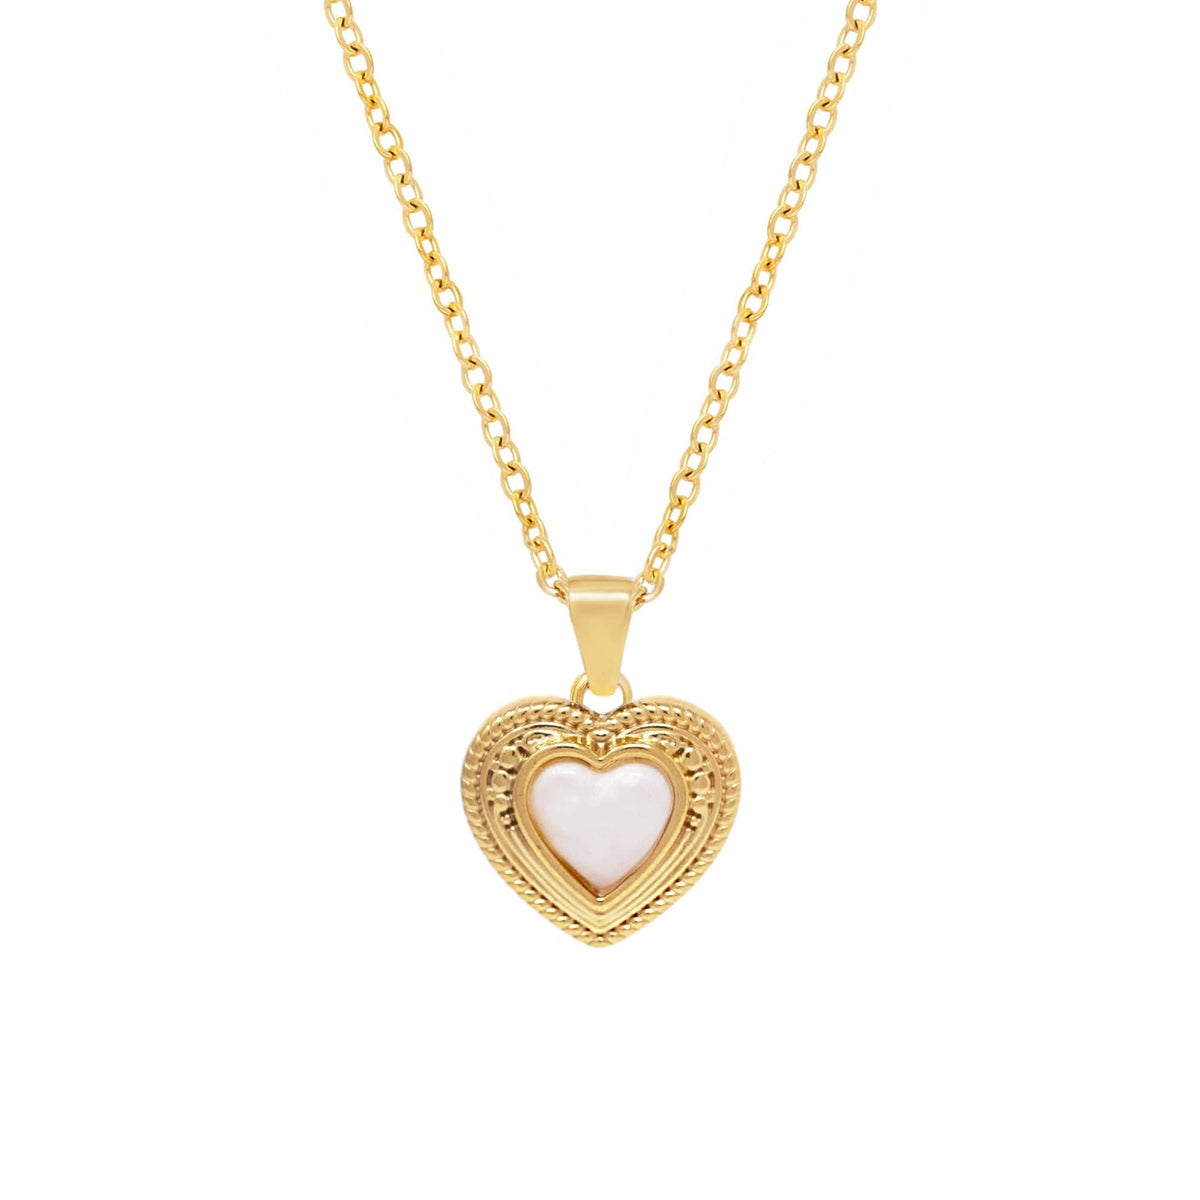 BohoMoon Stainless Steel Heartthrob Necklace Gold